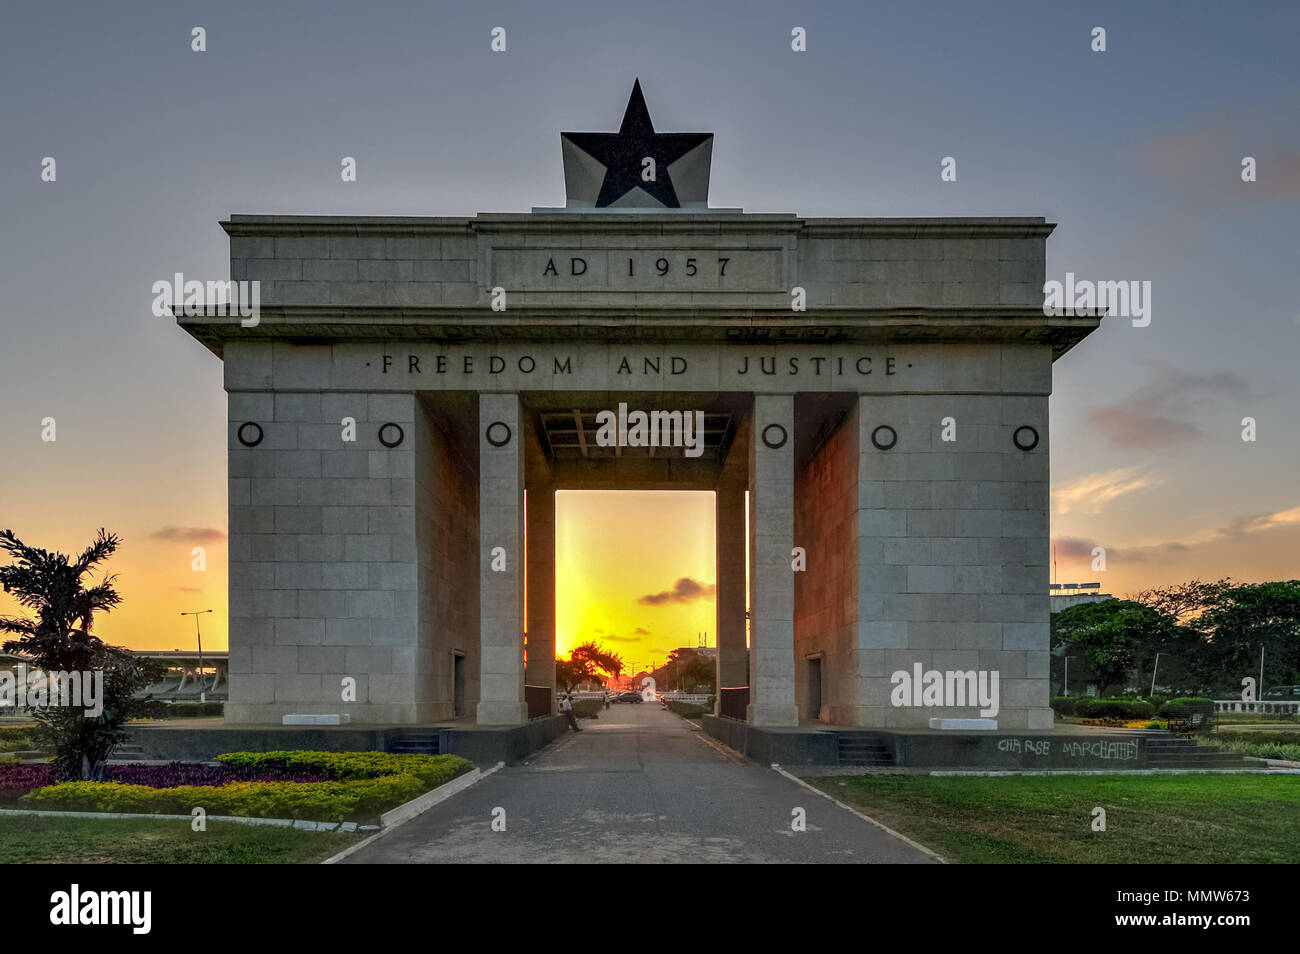 The Independence Arch of Independence Square of Accra, Ghana at sunset. Inscribed with the words 'Freedom and Justice, AD 1957', commemorates the inde Stock Photo